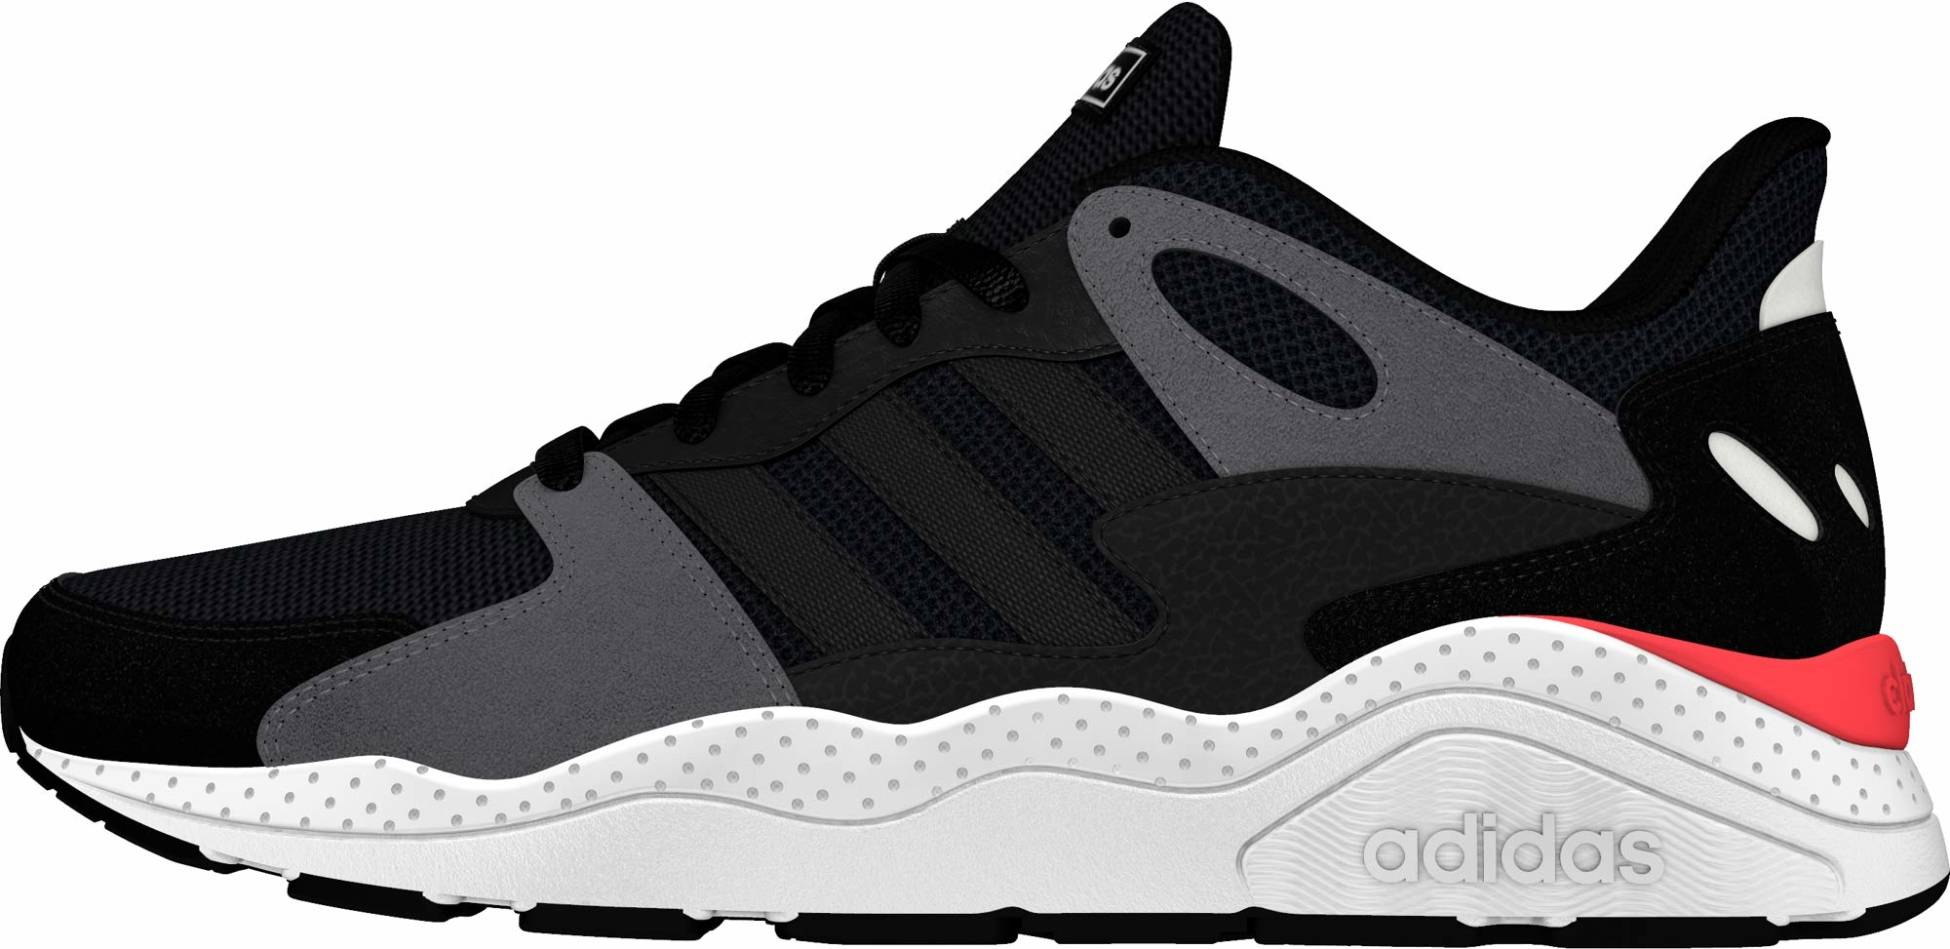 Adidas Crazychaos sneakers in 8 colors (only $60) | RunRepeat ايفون اس ار